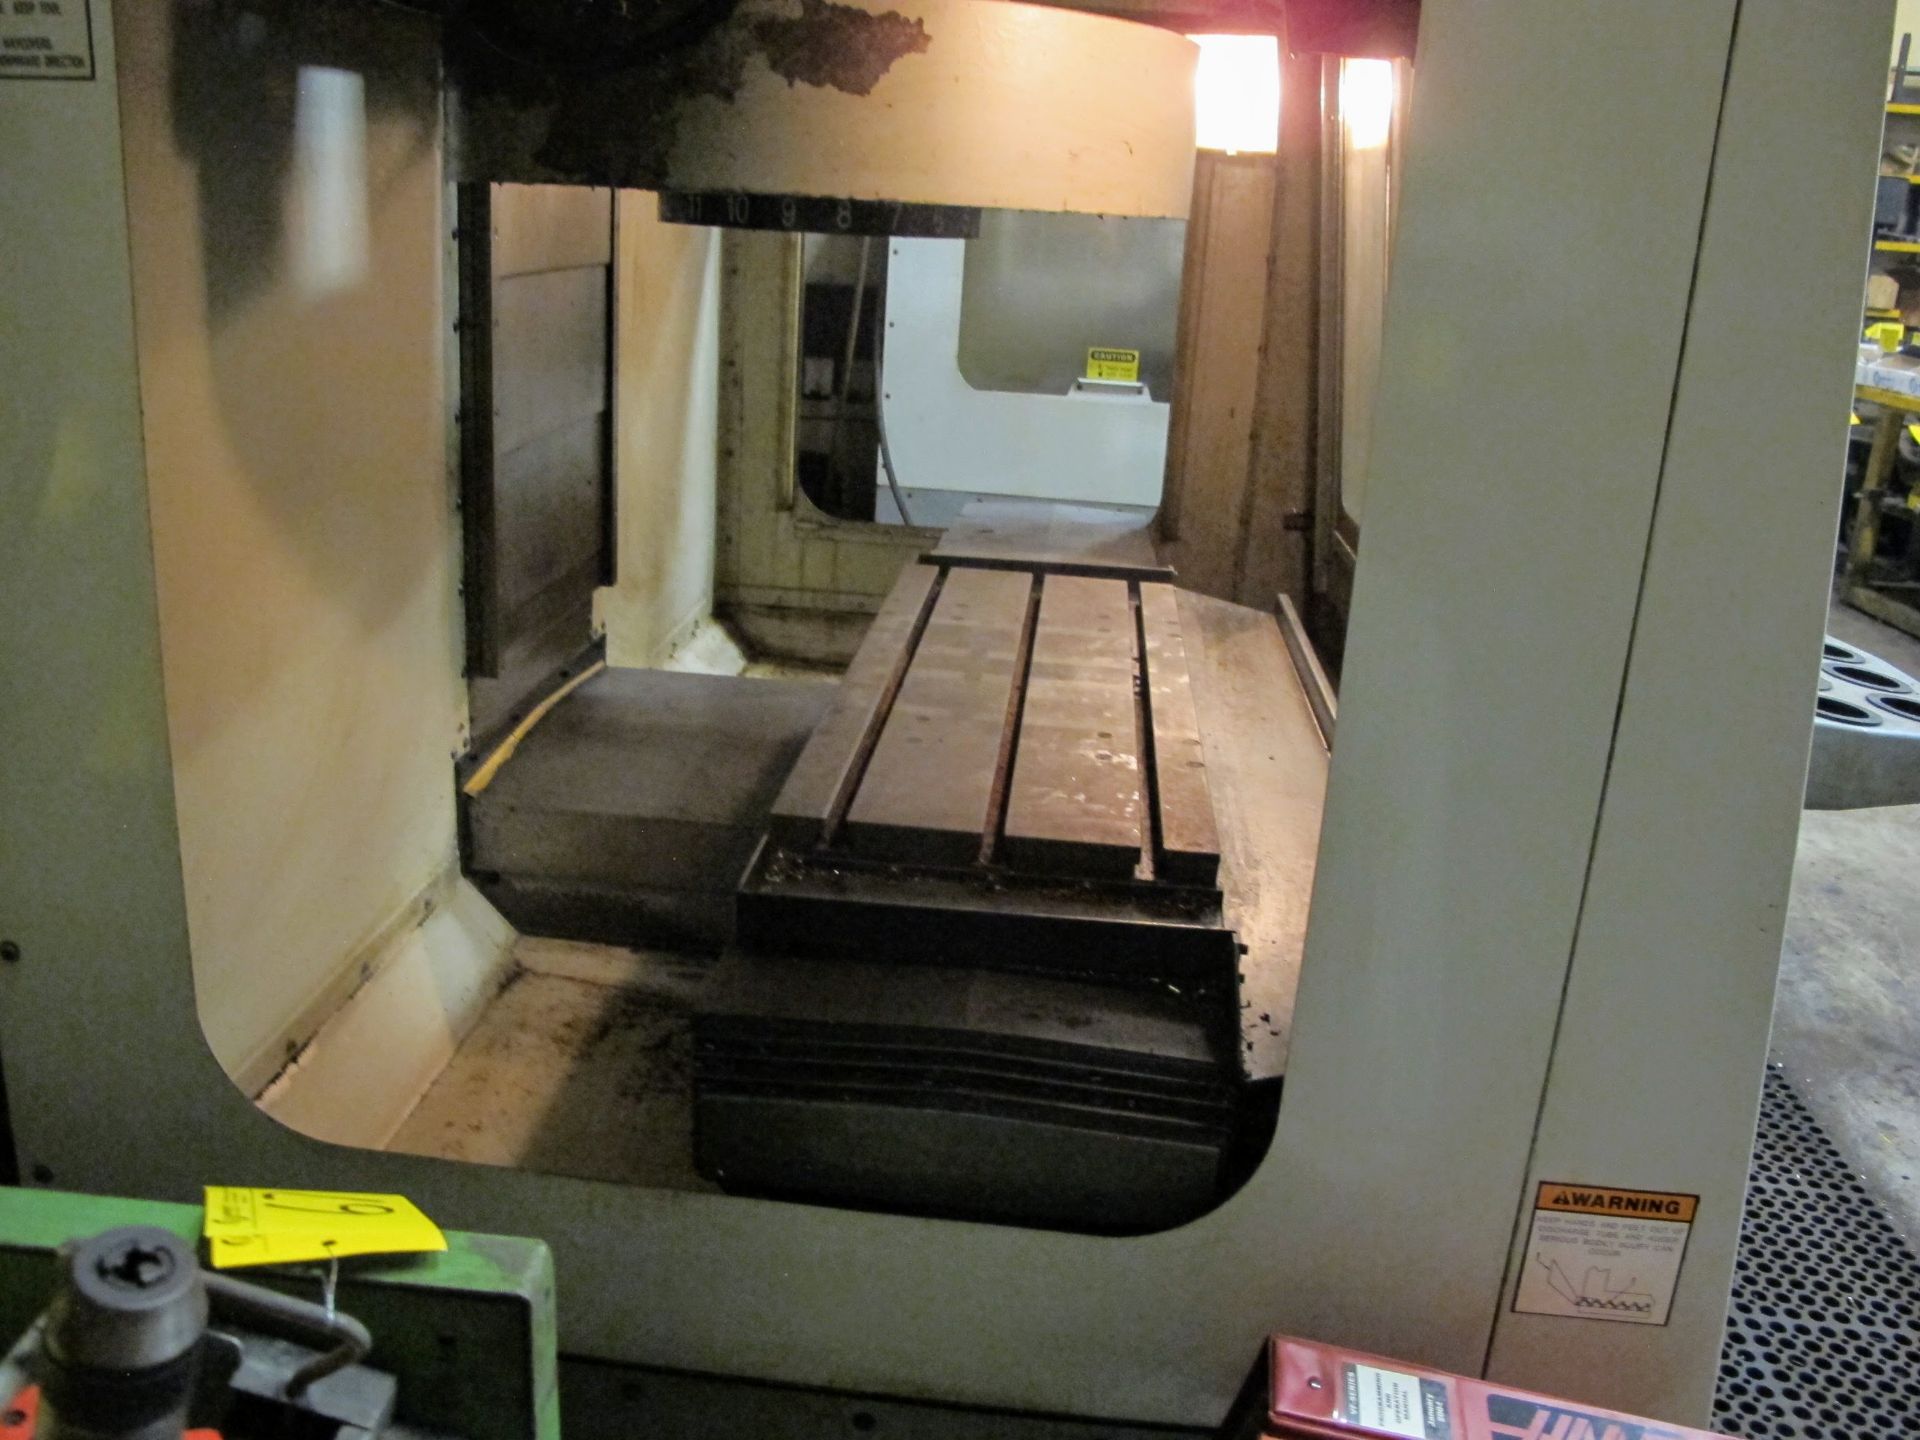 2004 HAAS VF2D CNC VERTICAL MACHINING CENTER, CNC CONTROL, TRAVELS: X-30", Y-16", Z-20", 14" X 36" - Image 13 of 17